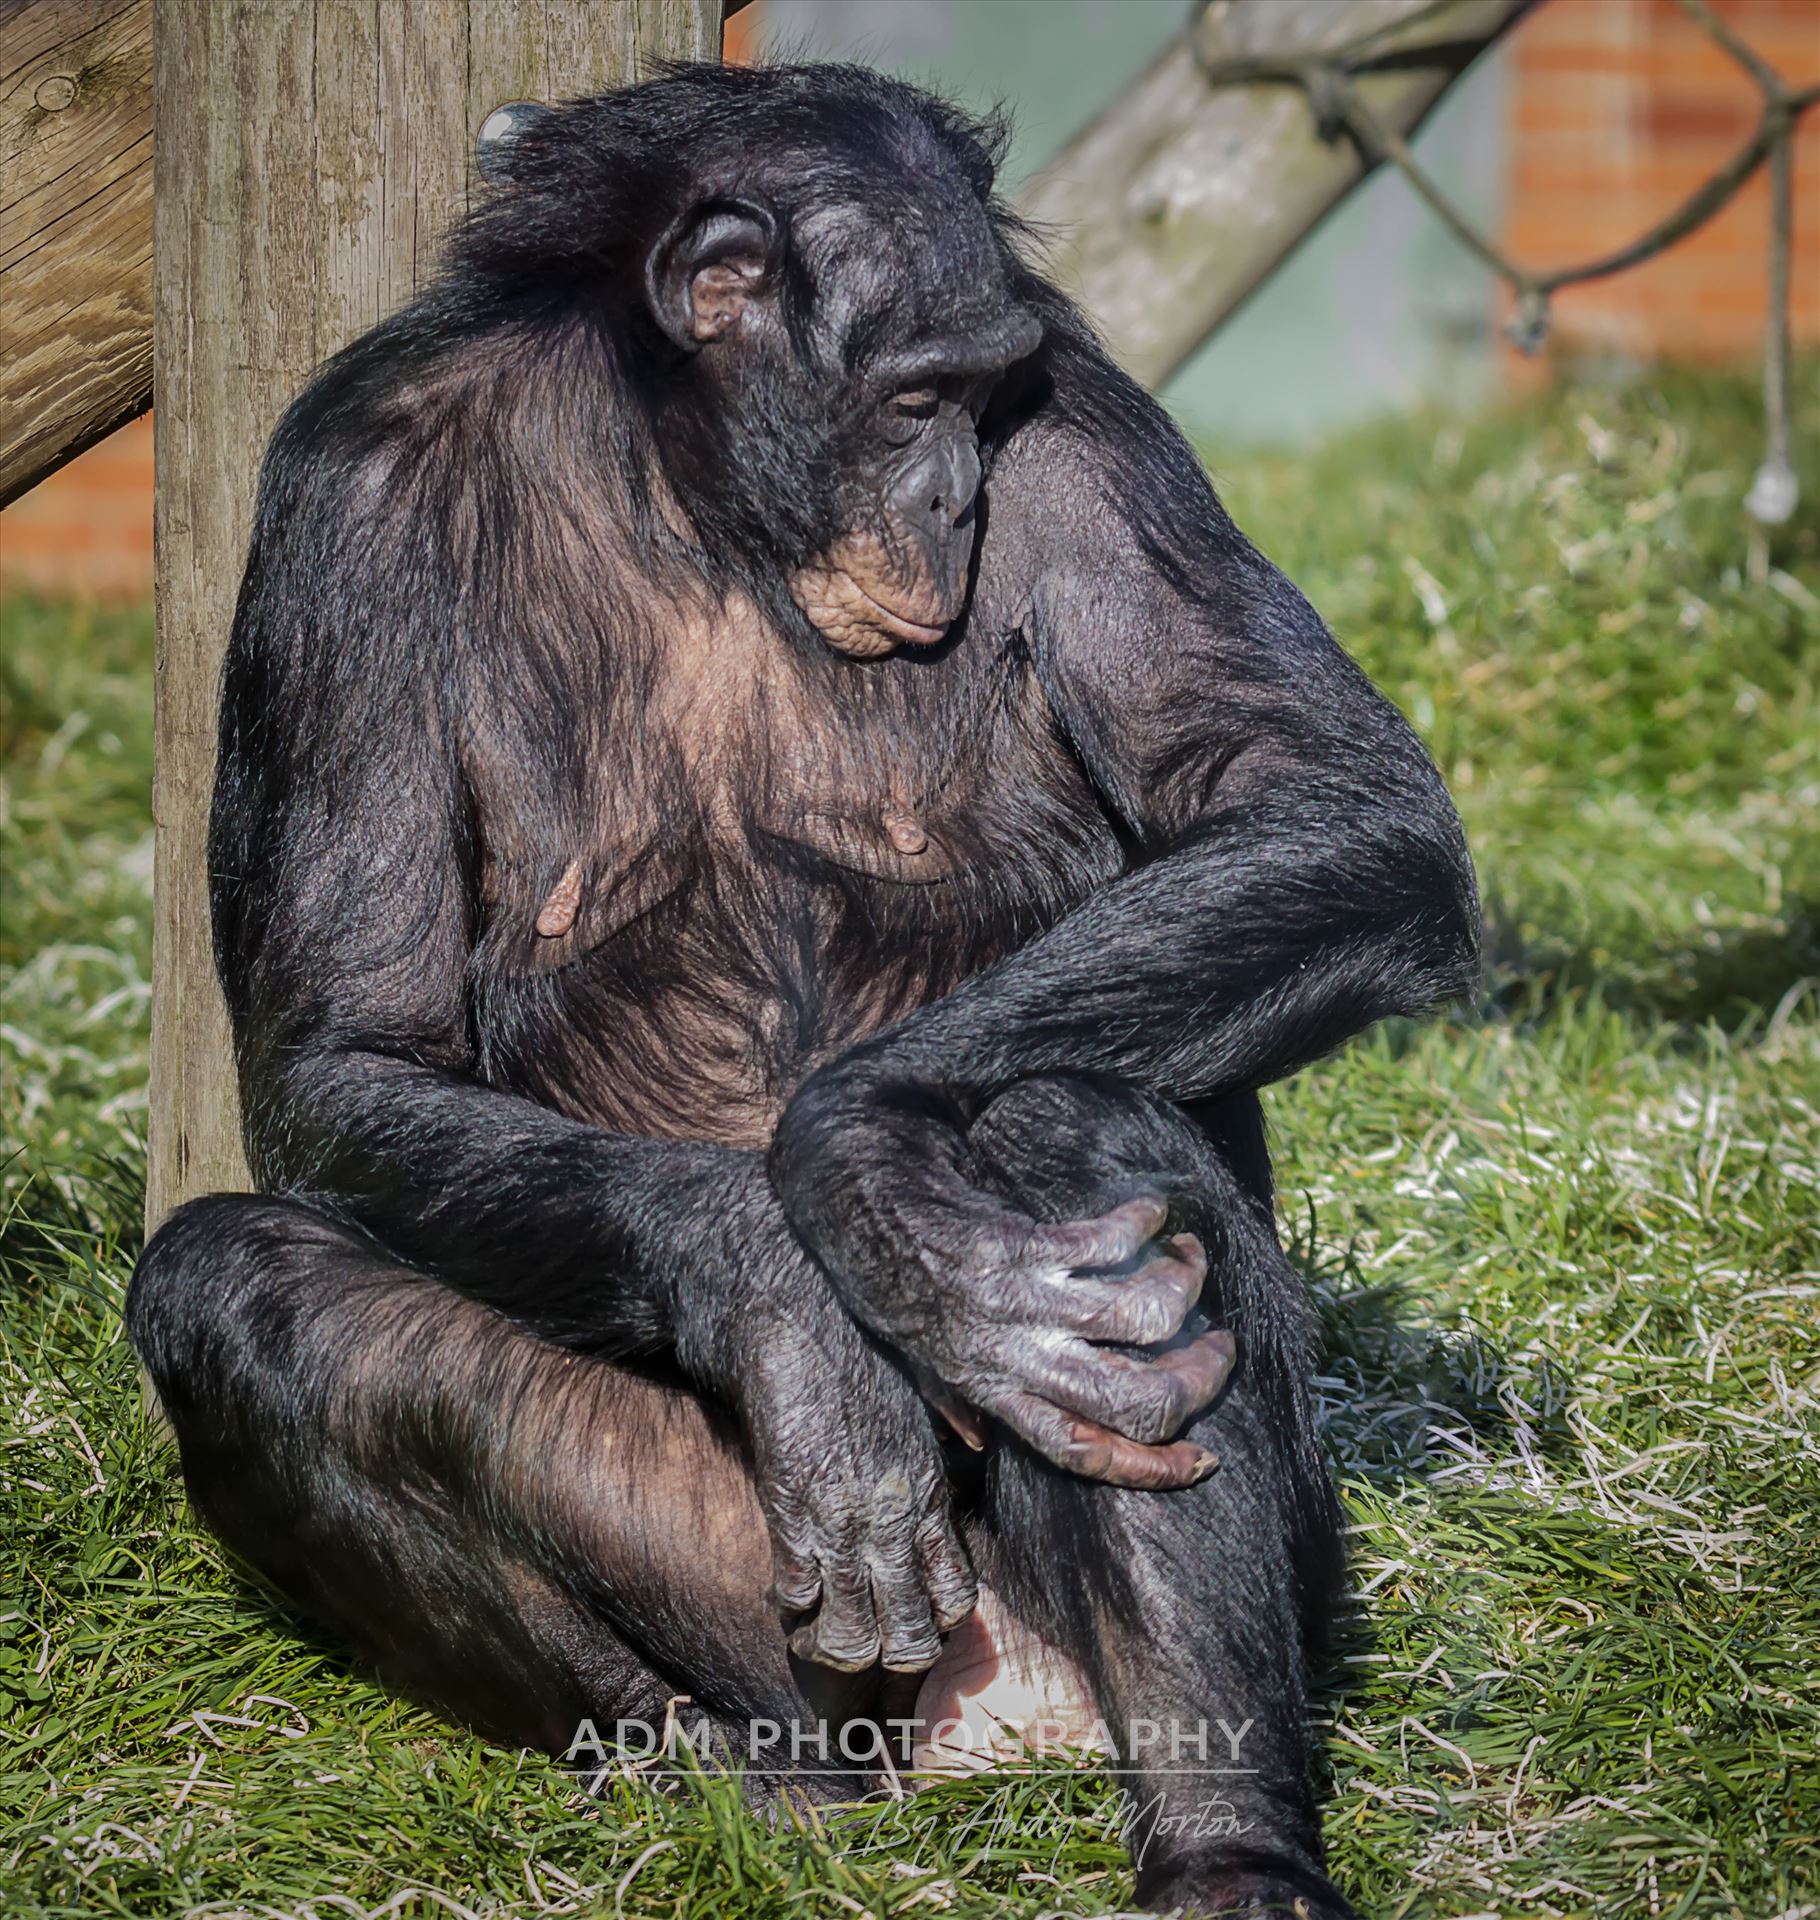 Bonobo Chimpanzee The taxonomical genus Pan consists of two extant species: the common chimpanzee and the bonobo. Together with humans, gorillas and orangutans they are part of the family Hominidae. by Andy Morton Photography